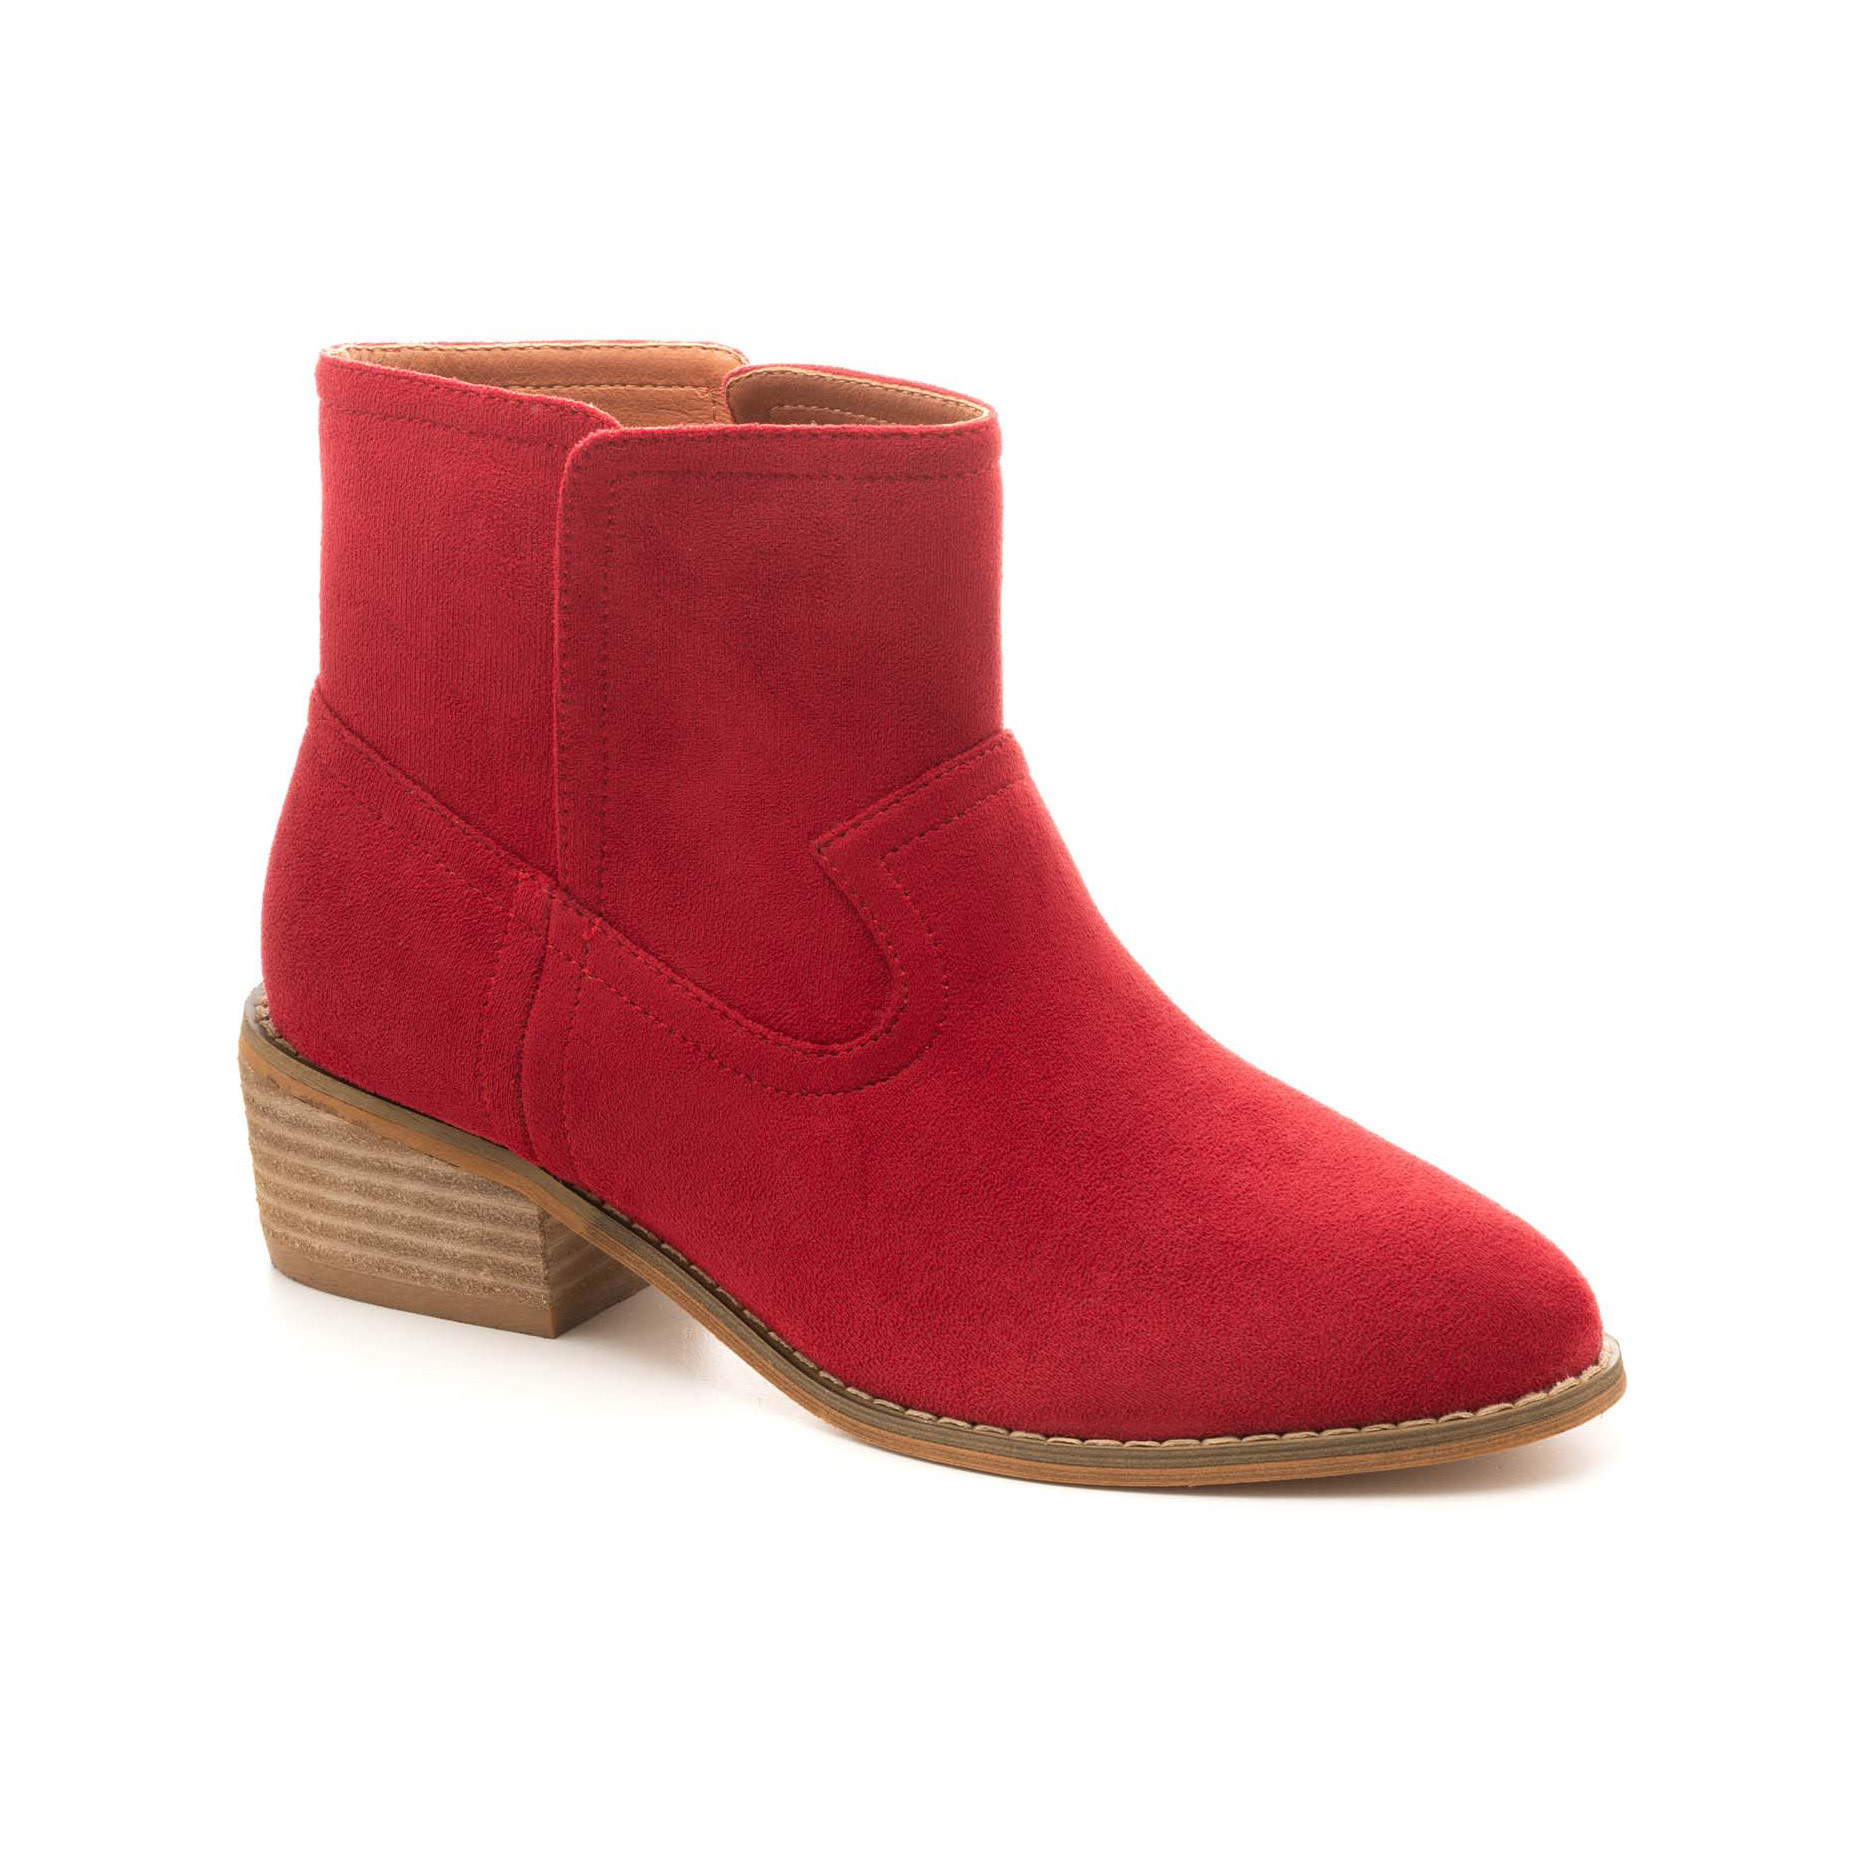 RED SALEM ANKLE BOOT